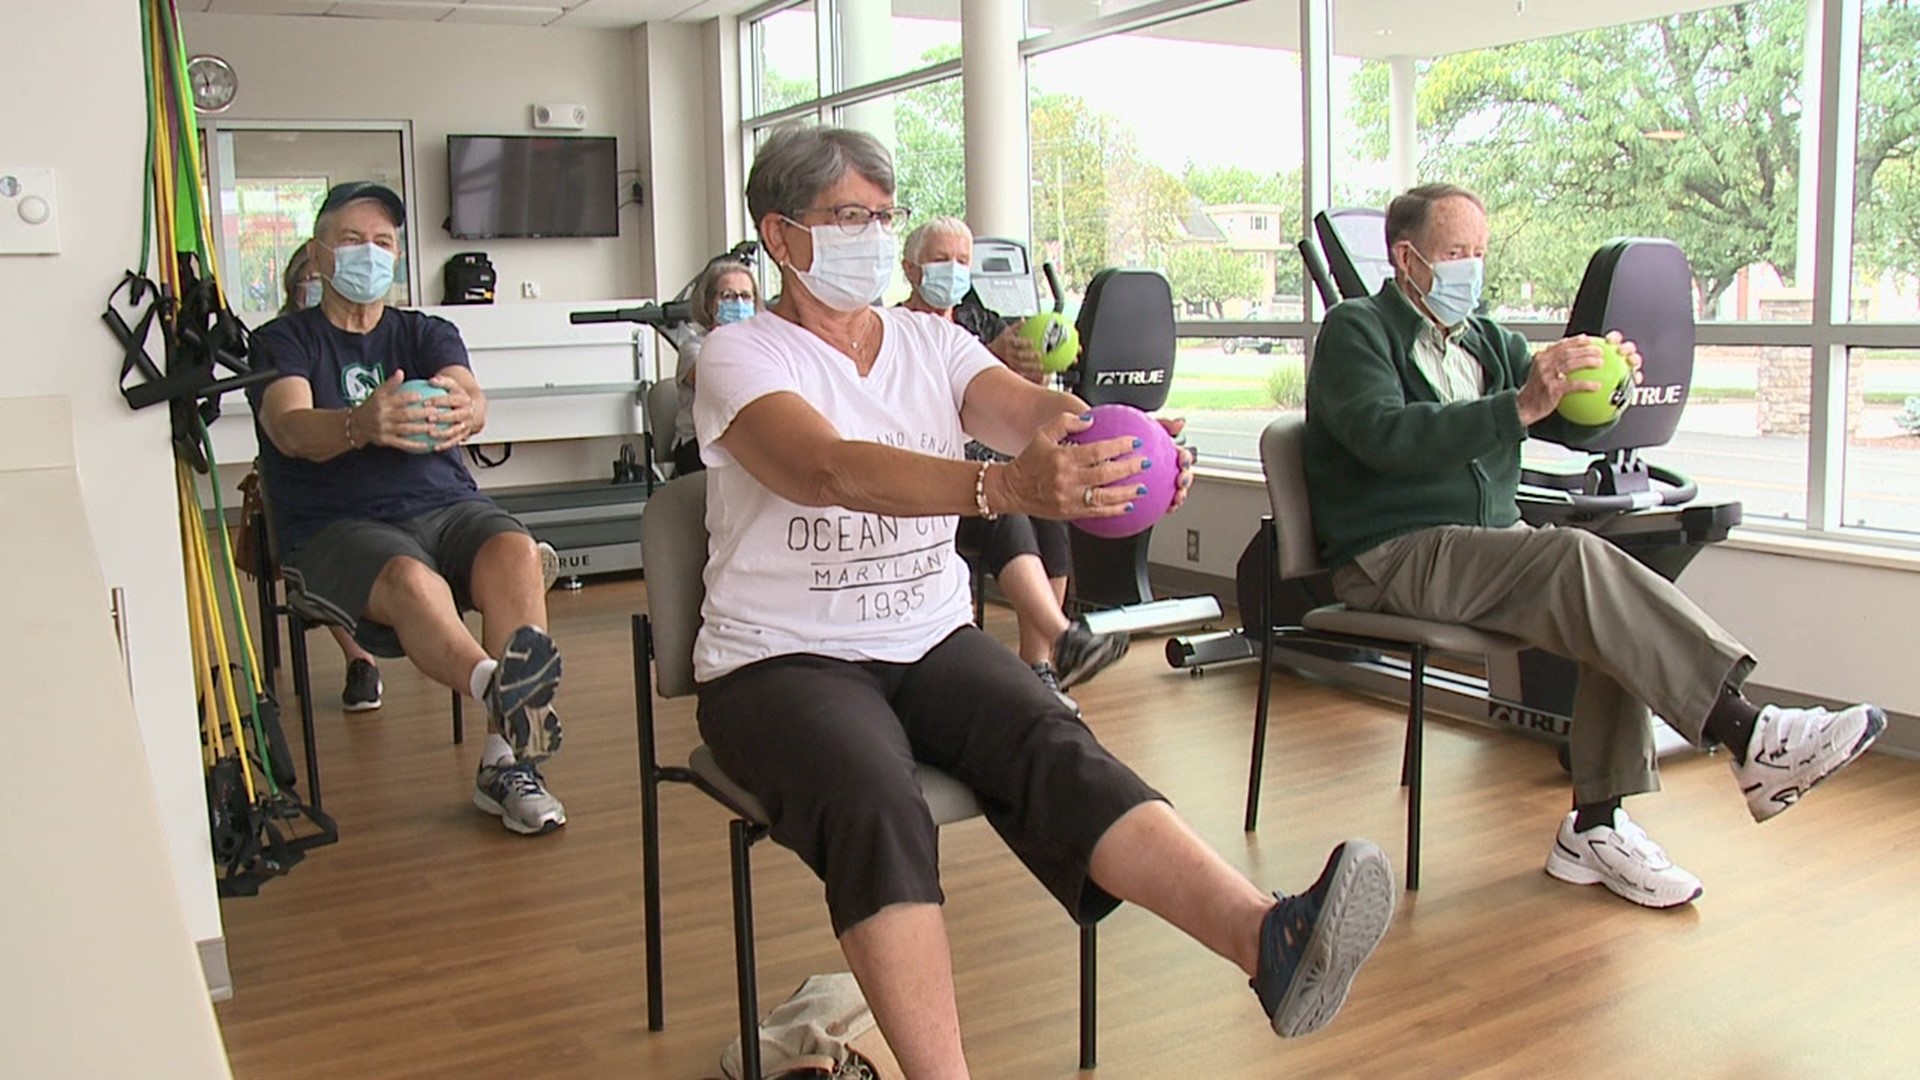 When COVID-19 hit last year, gyms and fitness centers were affected. That affected some older people in the area who used them to keep up strength and mobility.